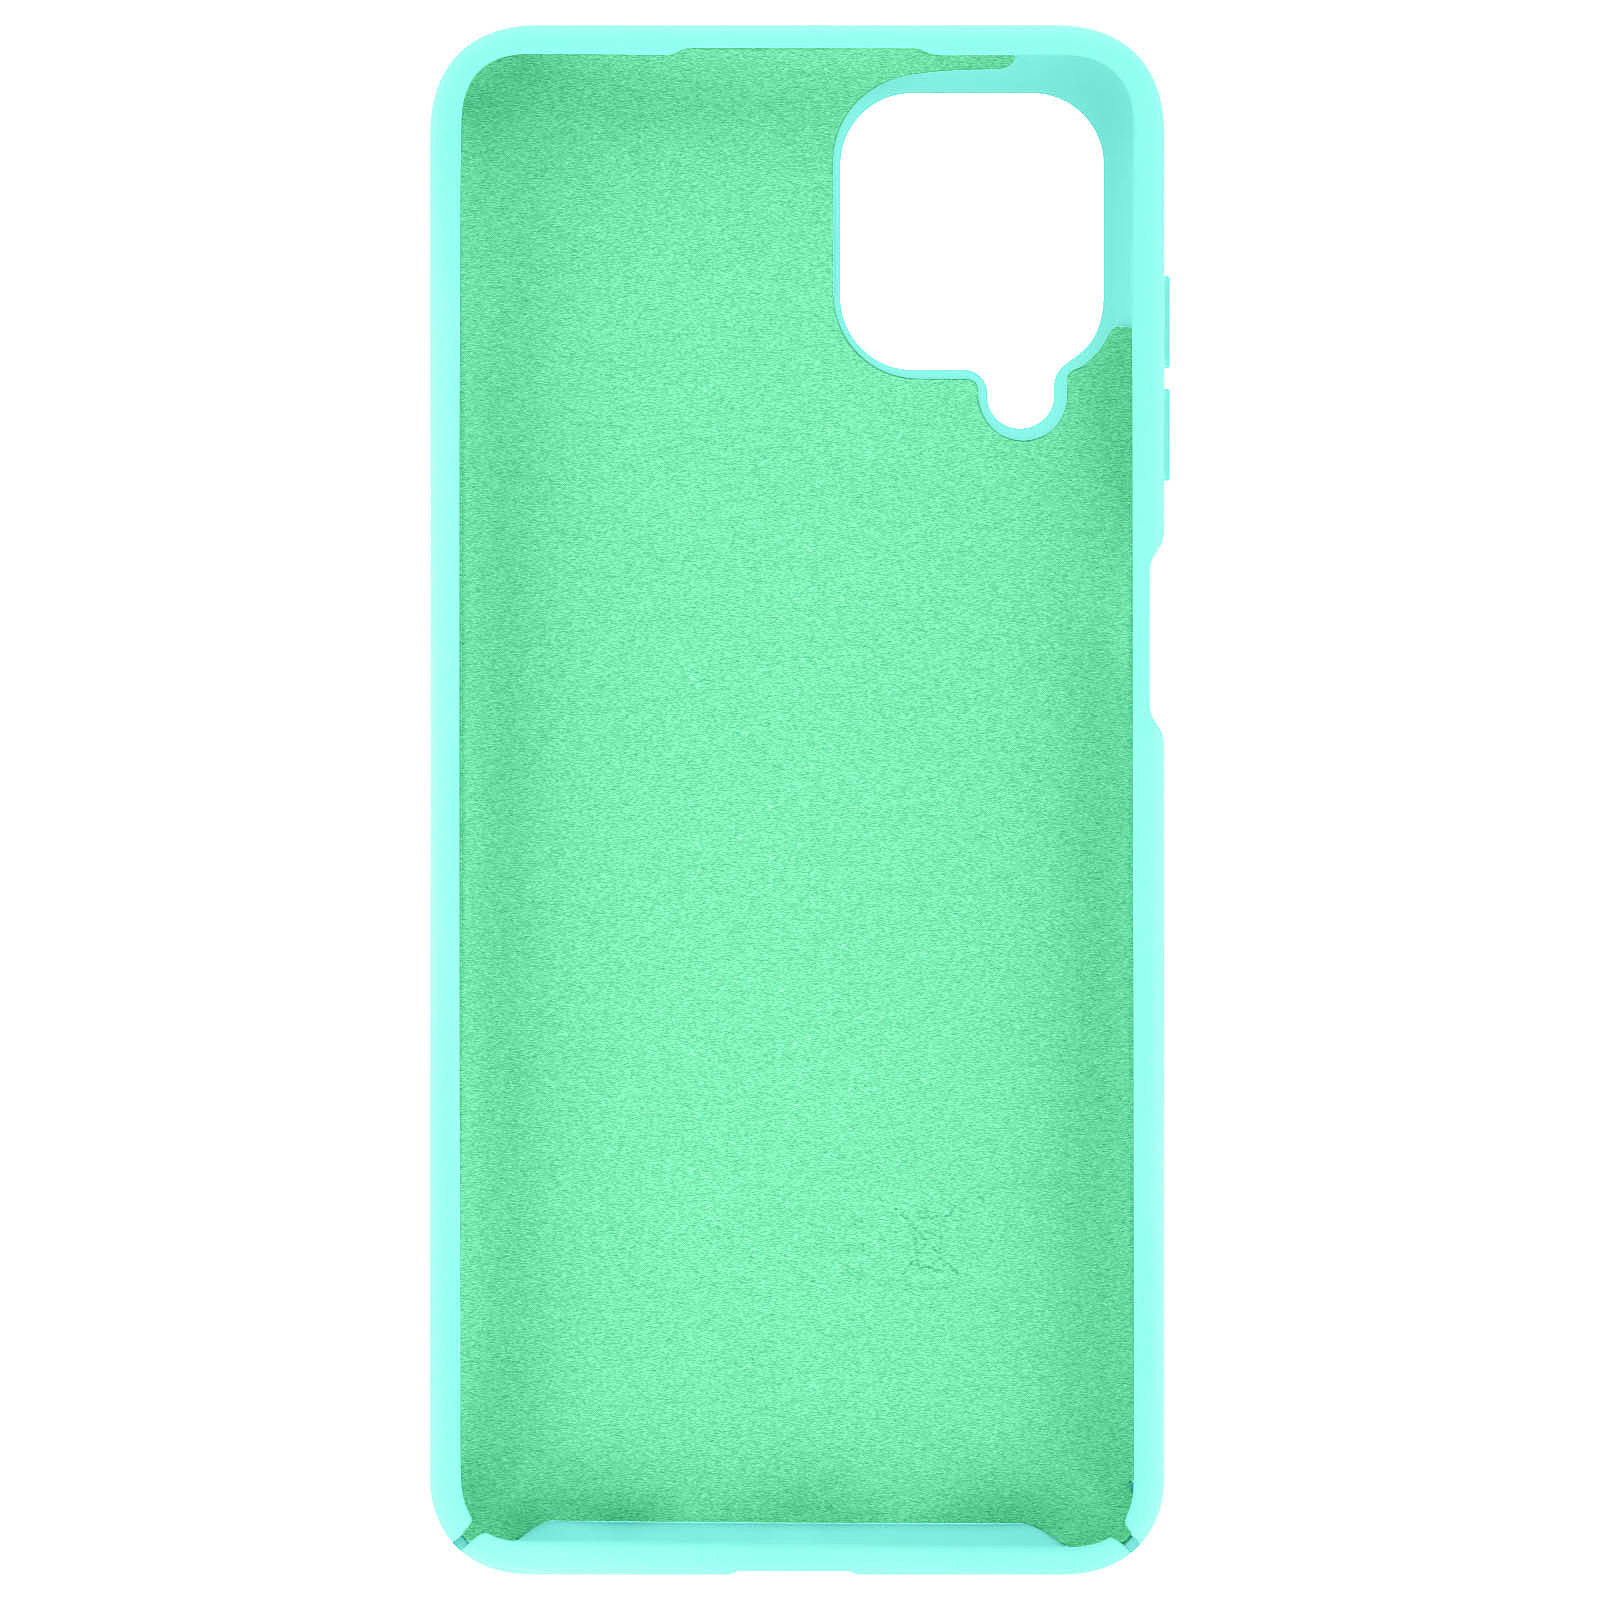 Avizar Coque pour Samsung Galaxy A12 Silicone Gel Souple Finition Soft Touch Turquoise - Coque telephone Avizar